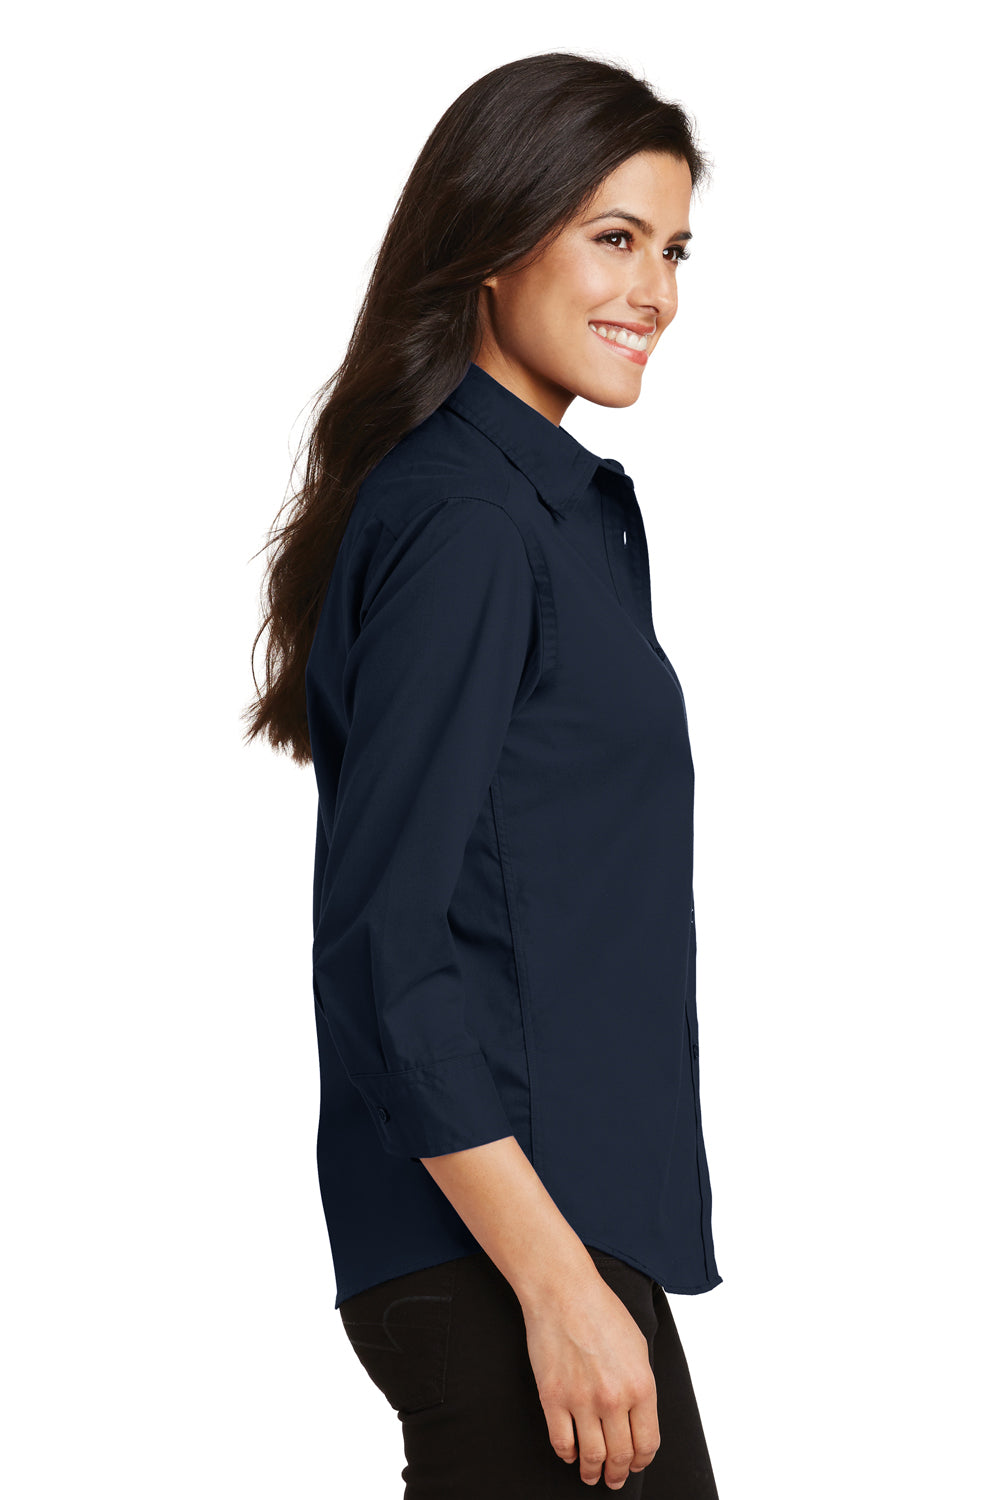 Port Authority L612 Womens Easy Care Wrinkle Resistant 3/4 Sleeve Button Down Shirt Navy Blue Side